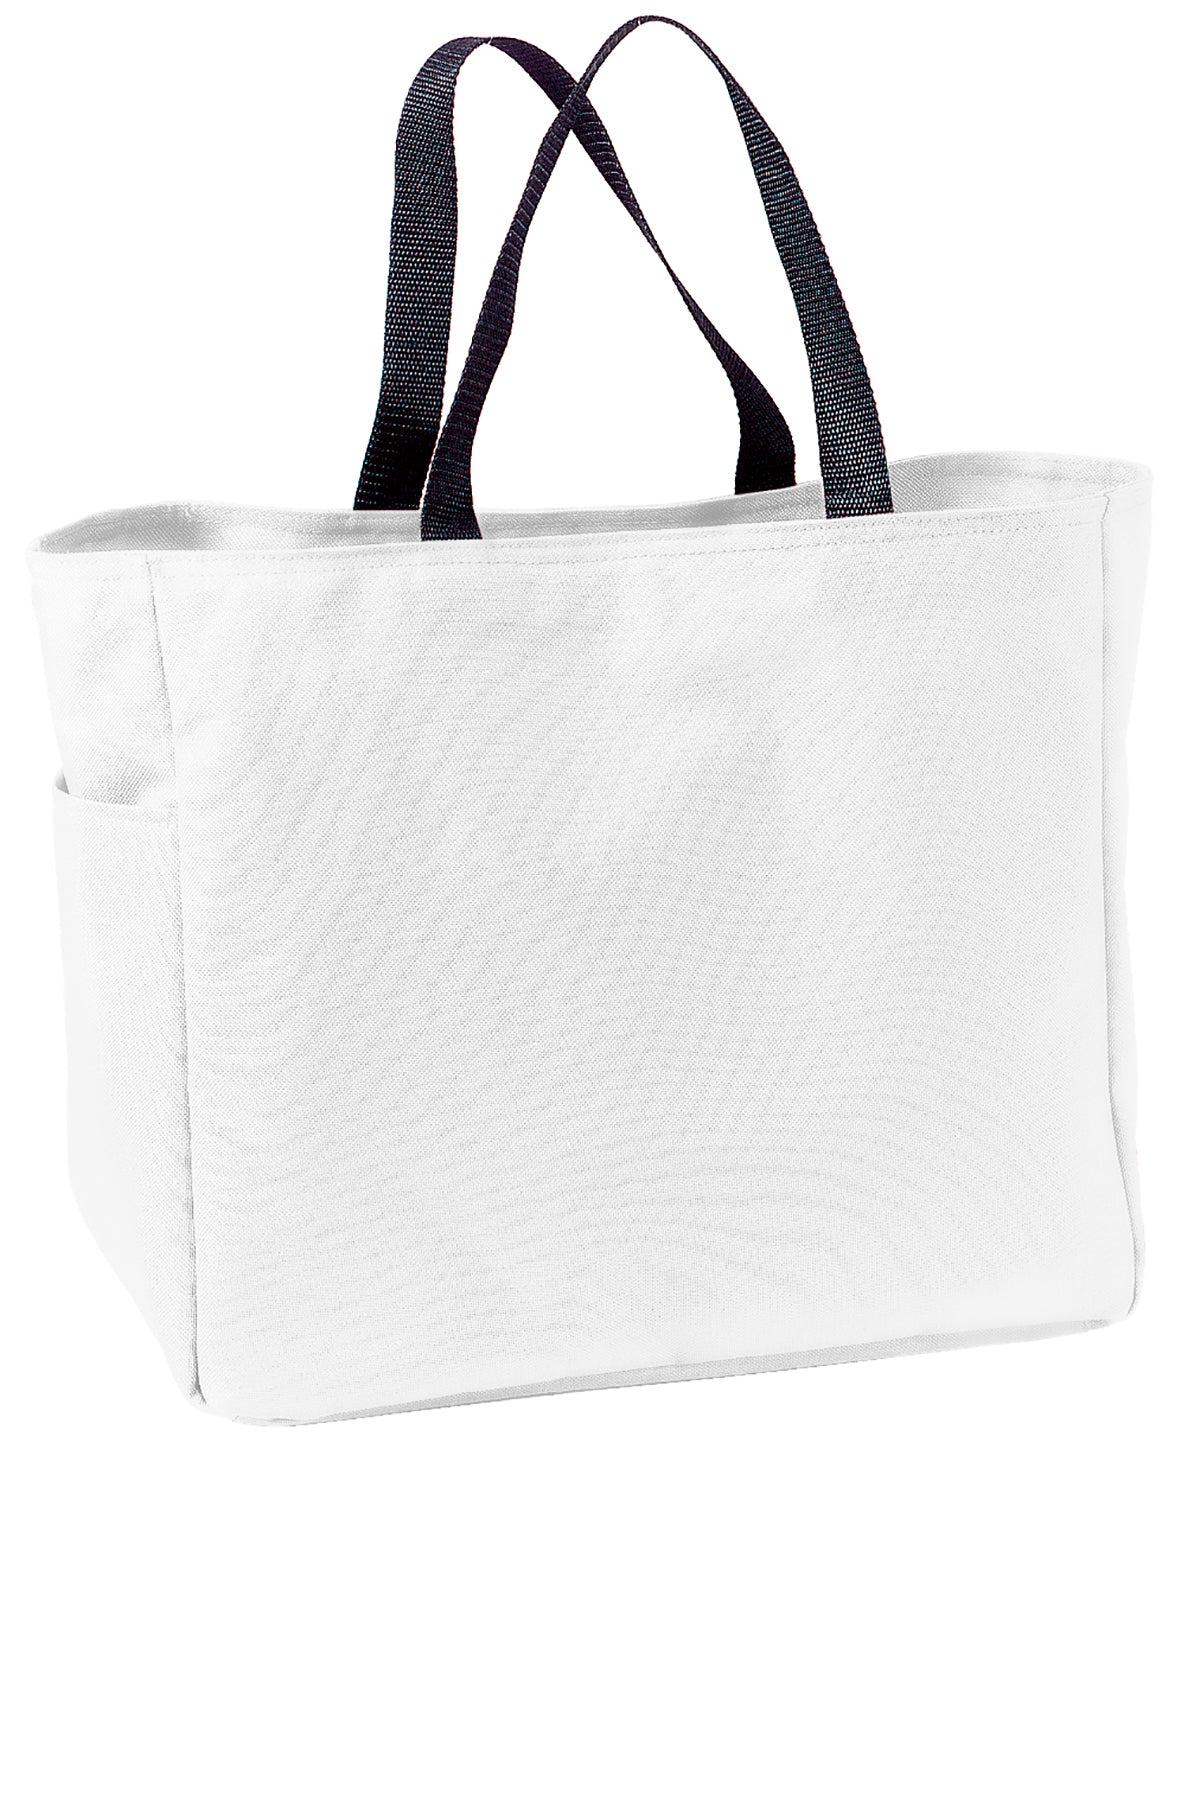 Polyester Improved Essential Tote Bags Wholesale - White